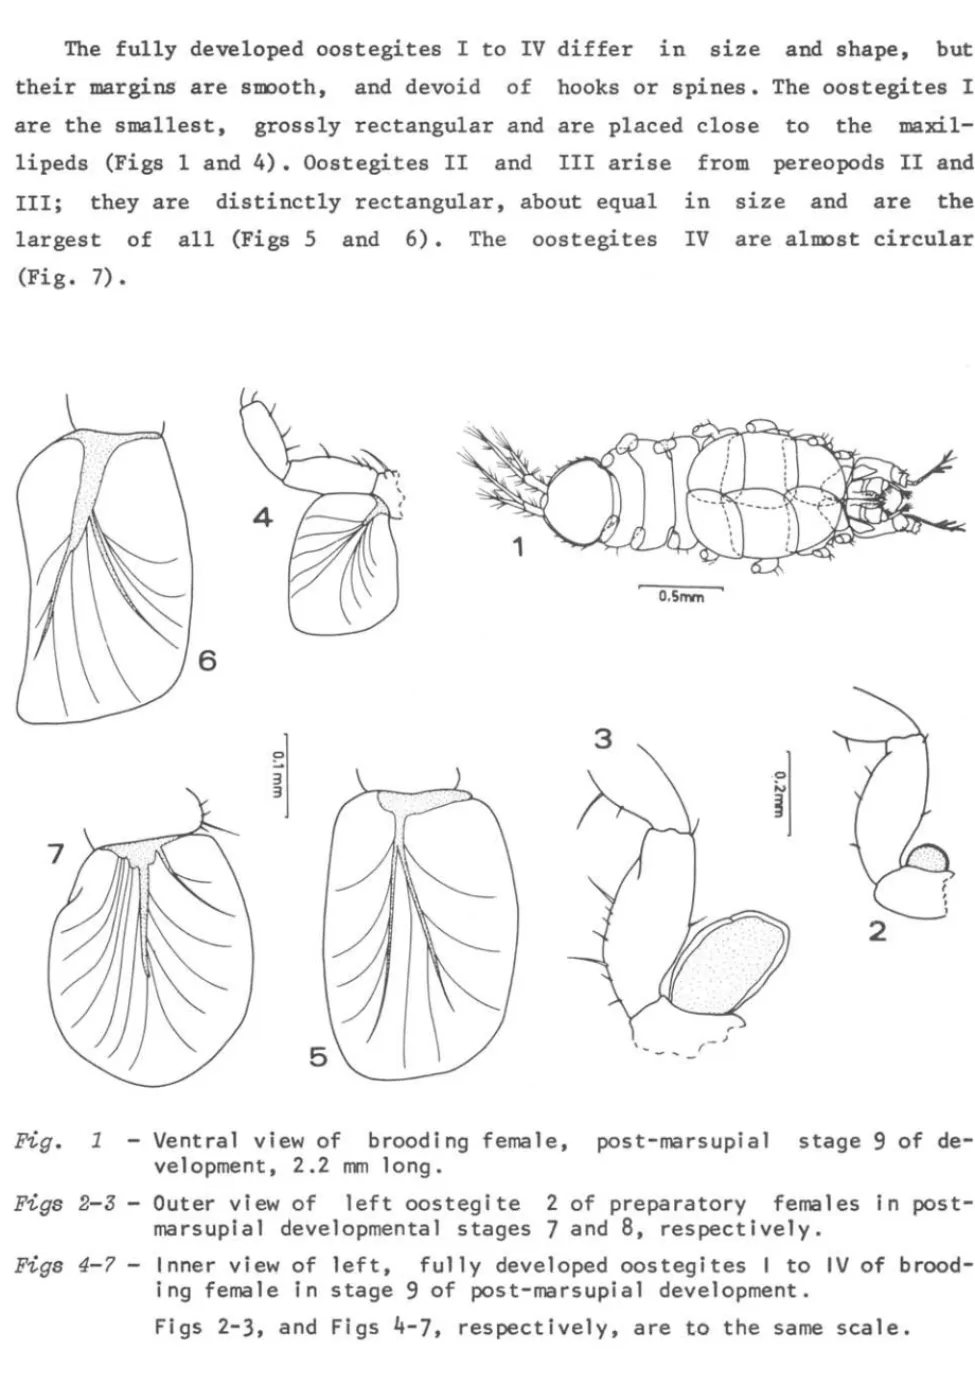 Figs  2-3  - Outer  view  of  left  oostegite  2  of  preparatory  females  in  post- post-marsupial  developrnental  stages  7  and  8,  respectively